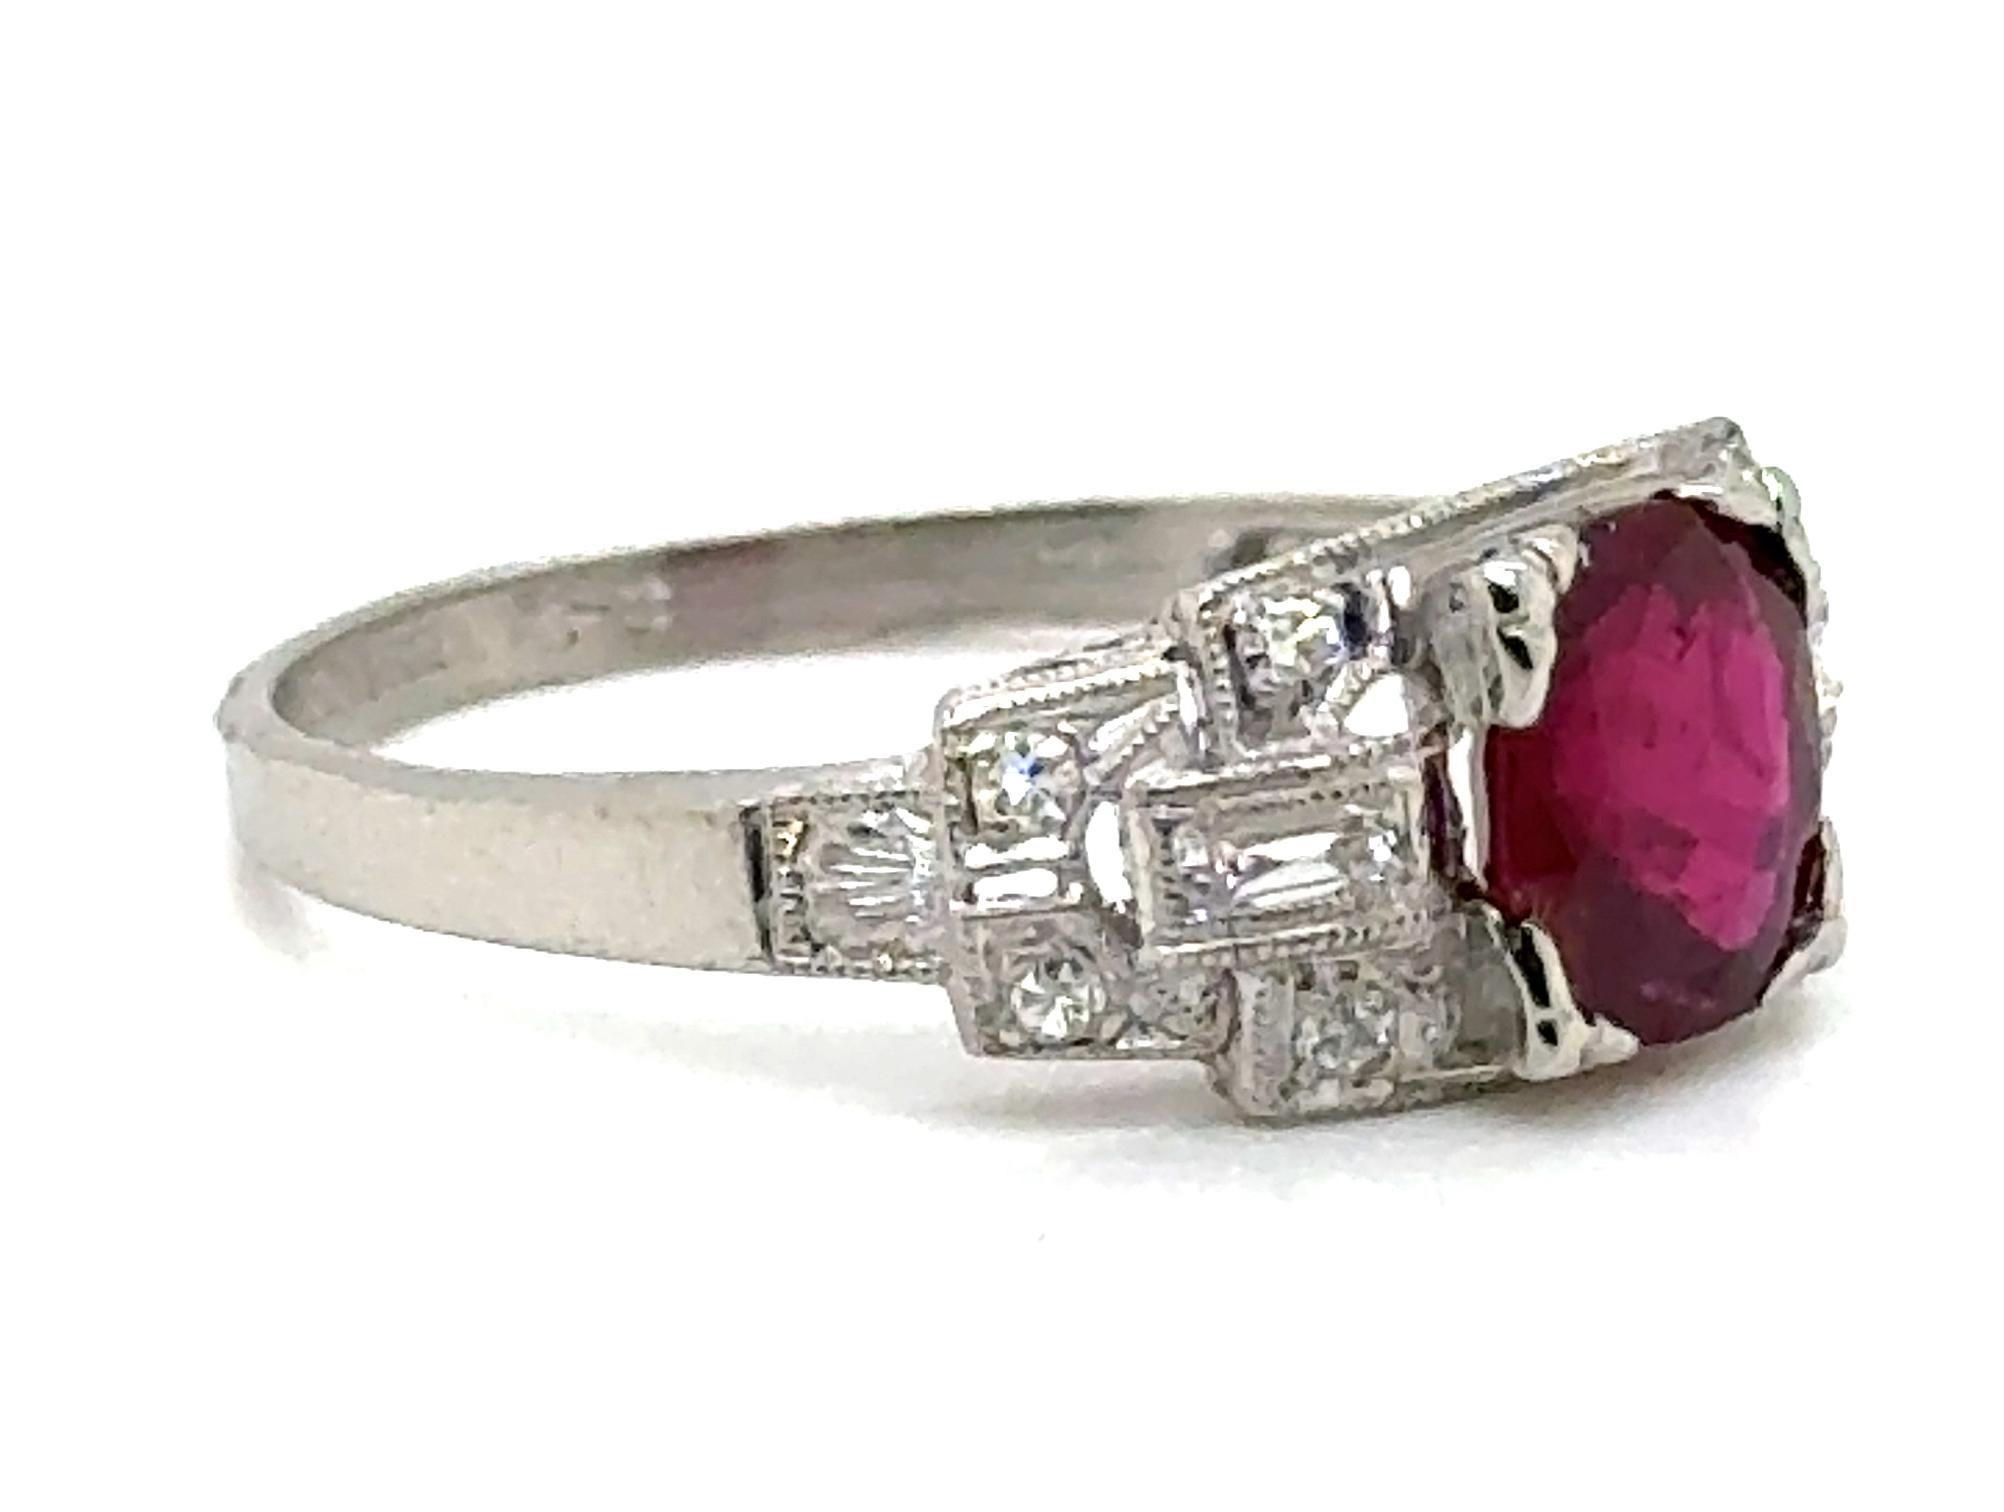 Genuine Original Klebanoff & Grossman Antique from the 1940's GIA Natural Ruby Ring 1.60ct Platinum


Stunning piece of jewelry featuring a 1.10 Carat Genuine Cushion Cut Natural Blood Red Ruby.

1.10 Carat Ruby is GIA Certified, highlighting its